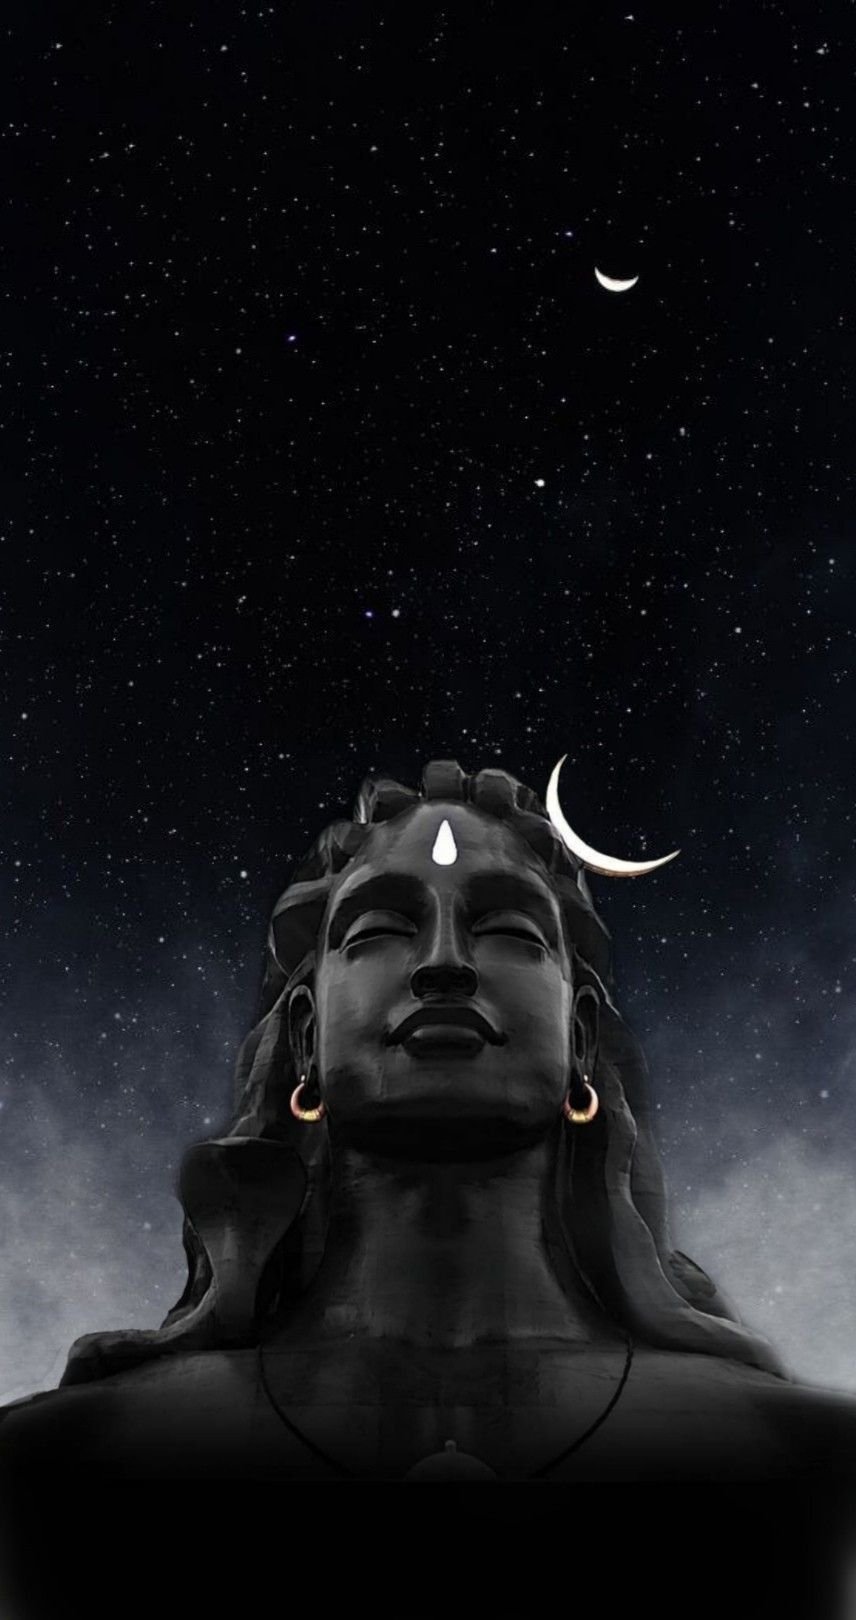 lord Shiva - Sculpture Wallpaper Download | MobCup